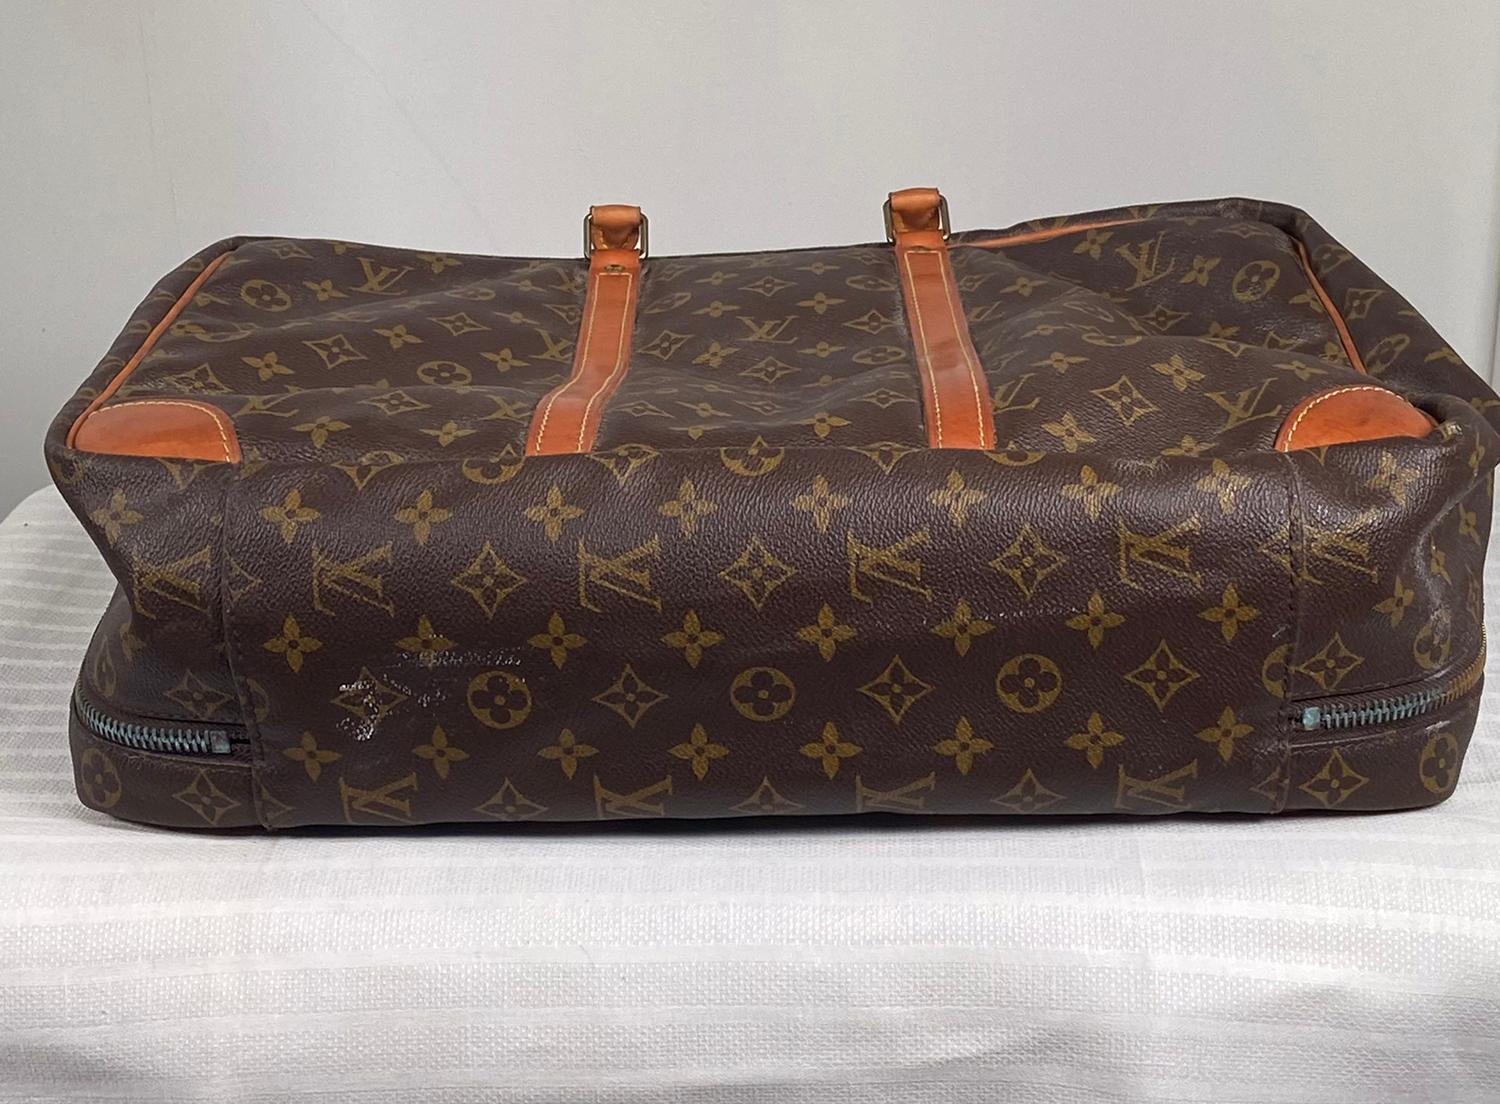 LOUIS VUITTON Sirius 45 Carry On Over Night Travel Bag  1